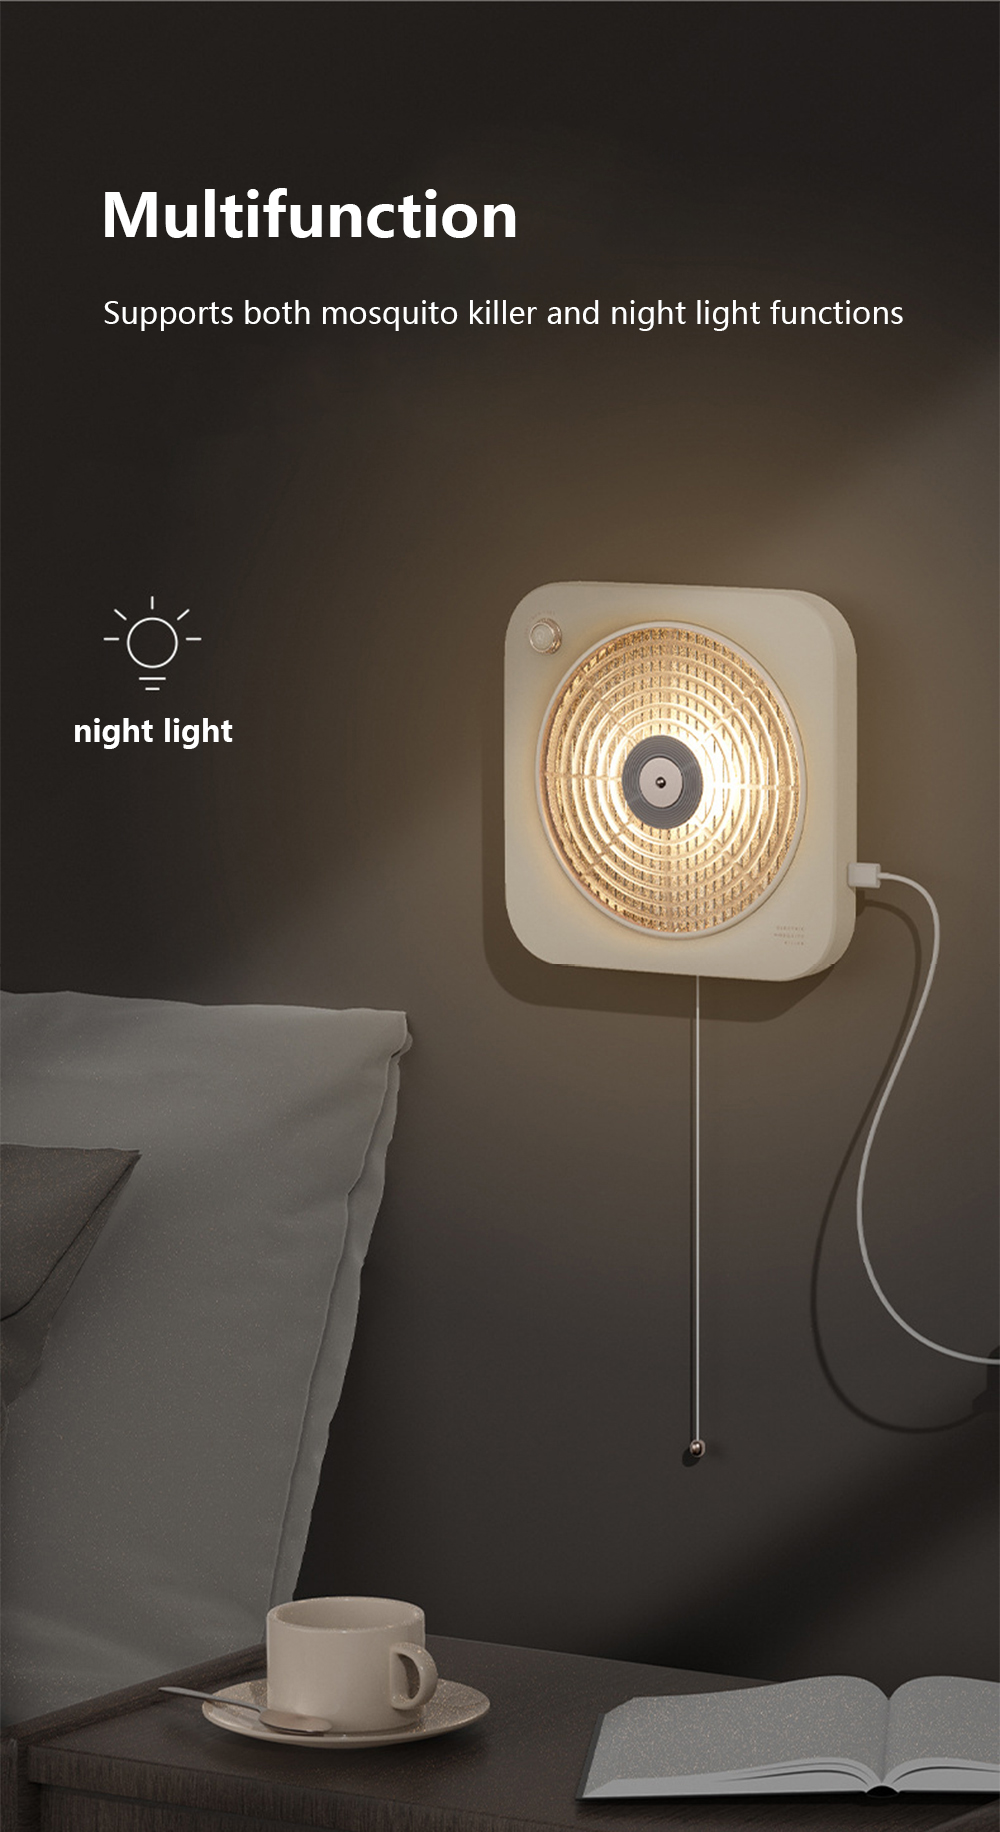 MAOXIN-Multifunctional-Mosquito-Killer-Lamp-Desktop-VerticalWall-Mount-Mosquito-Lamp-With-Small-Nigh-1953884-7